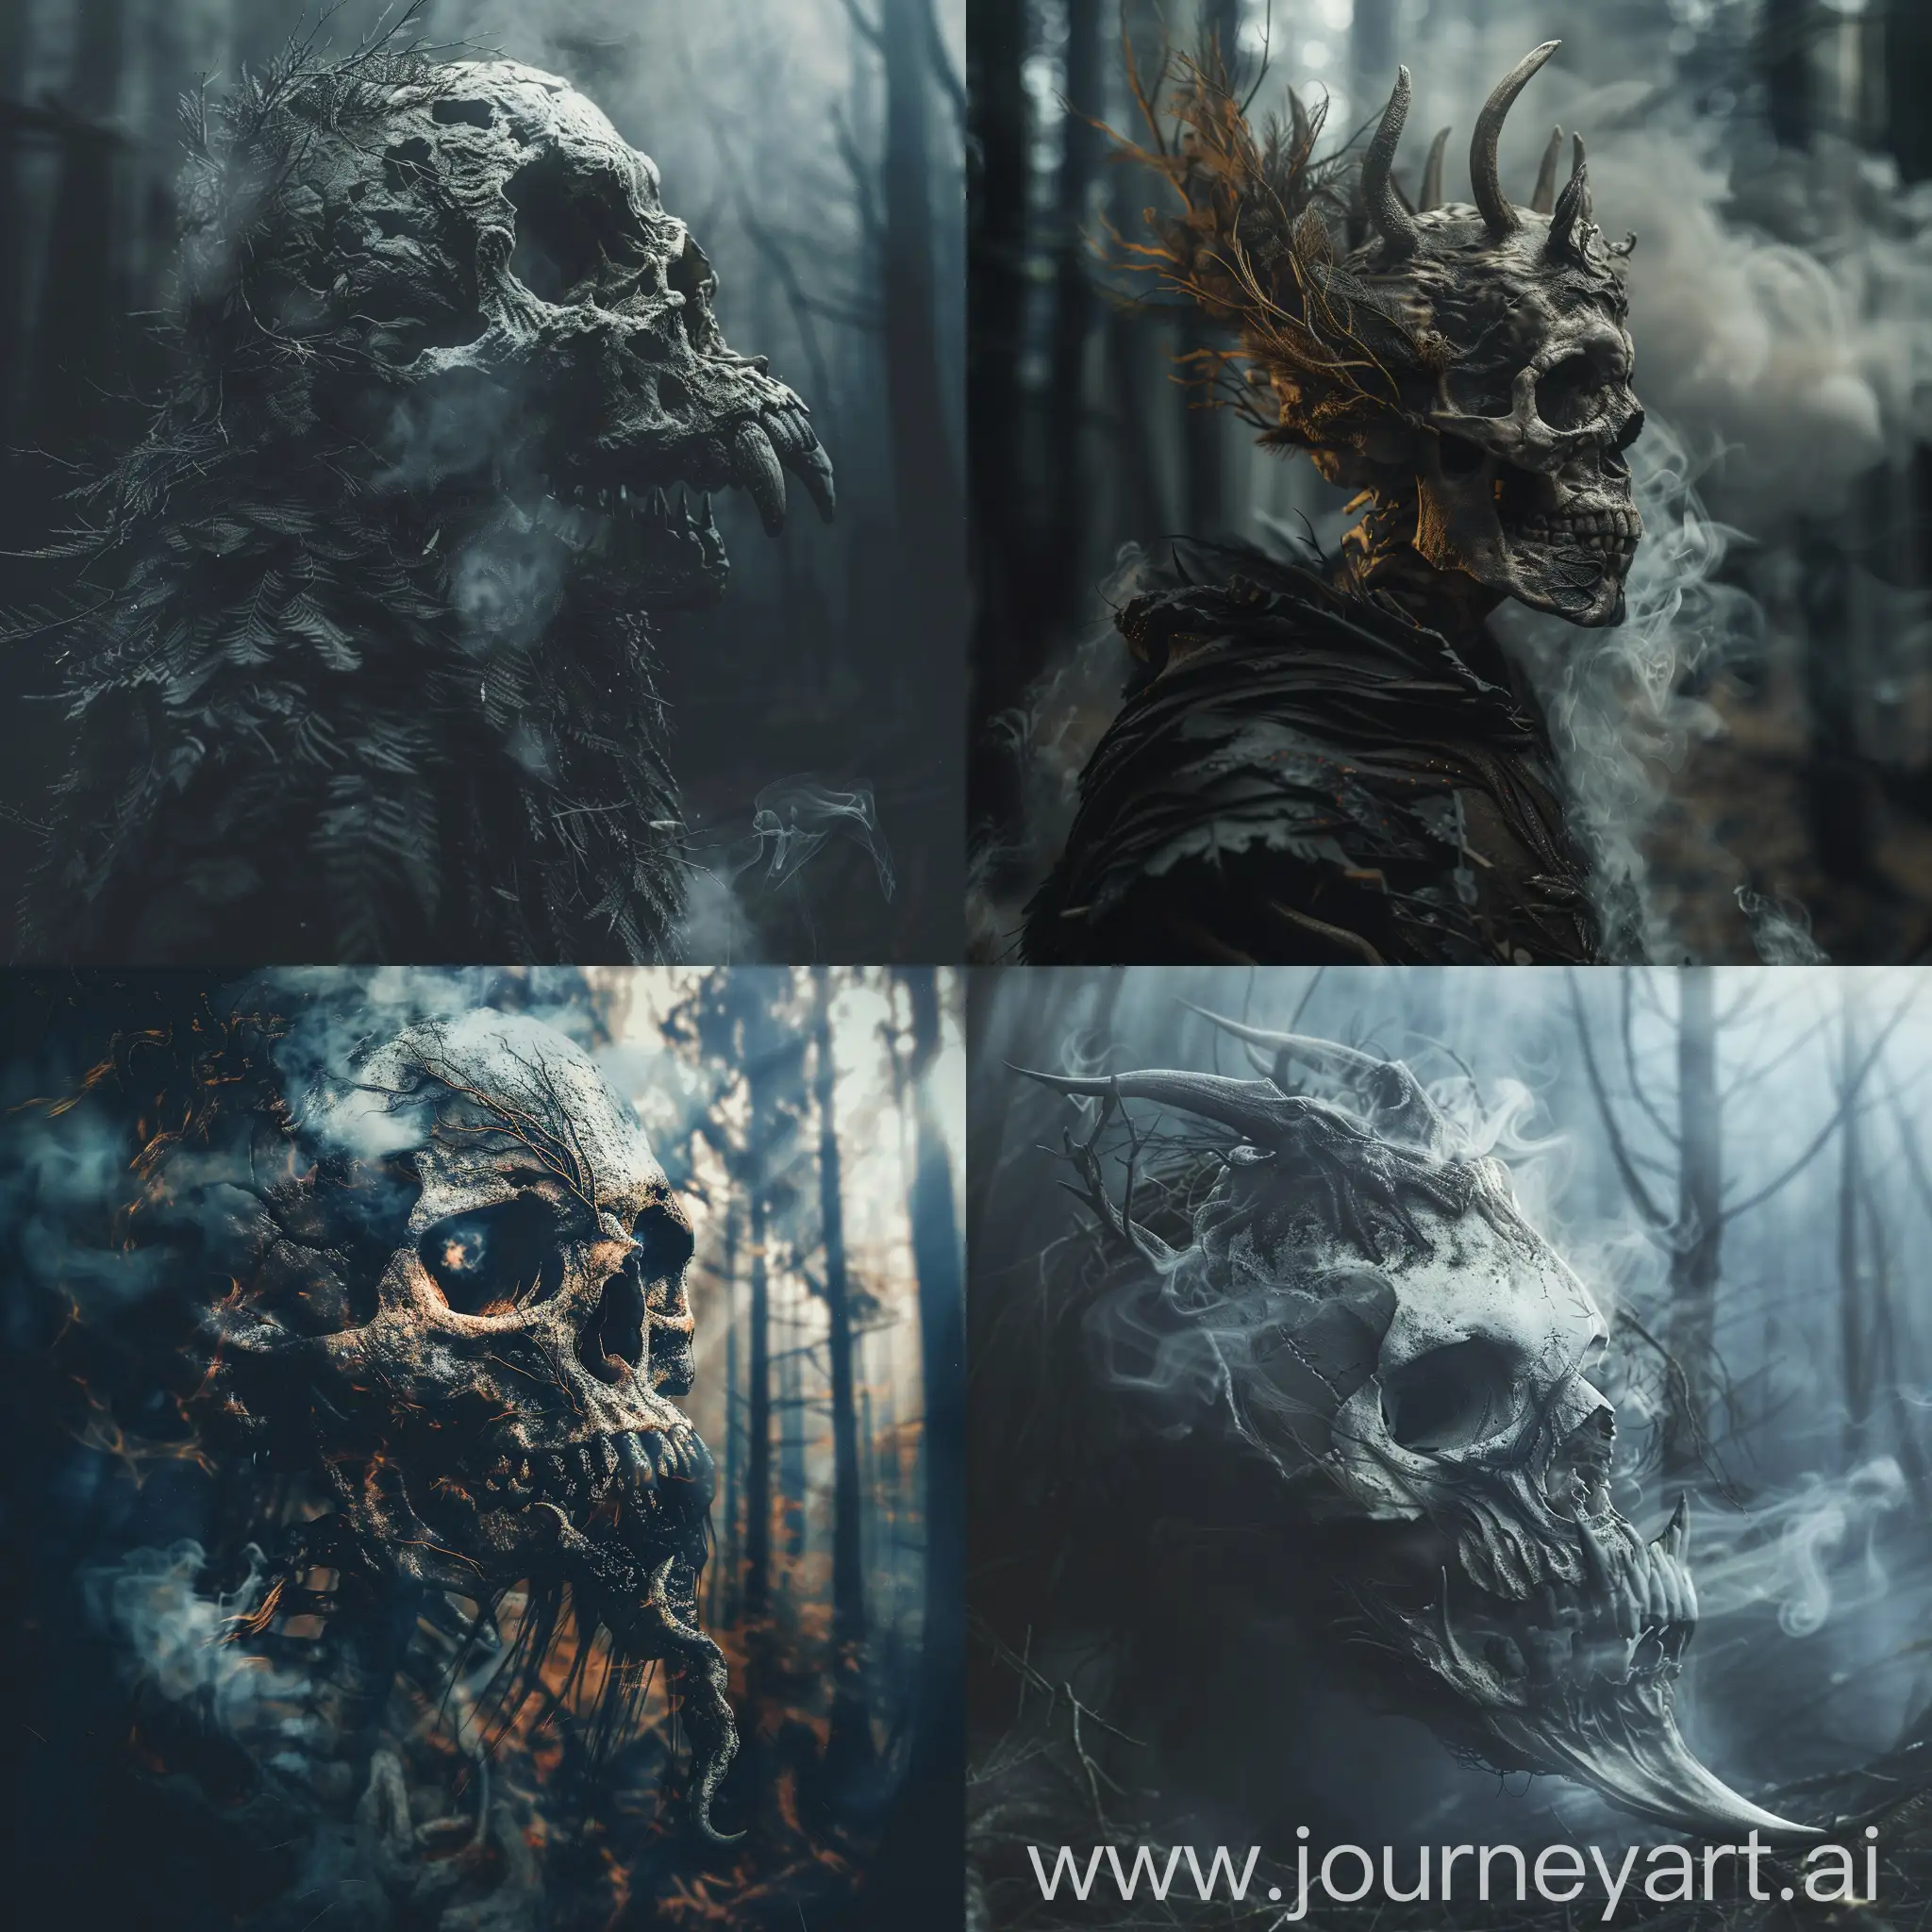 Mythical-Creature-of-Death-in-Dark-Forest-HighQuality-8KHD-Portrait